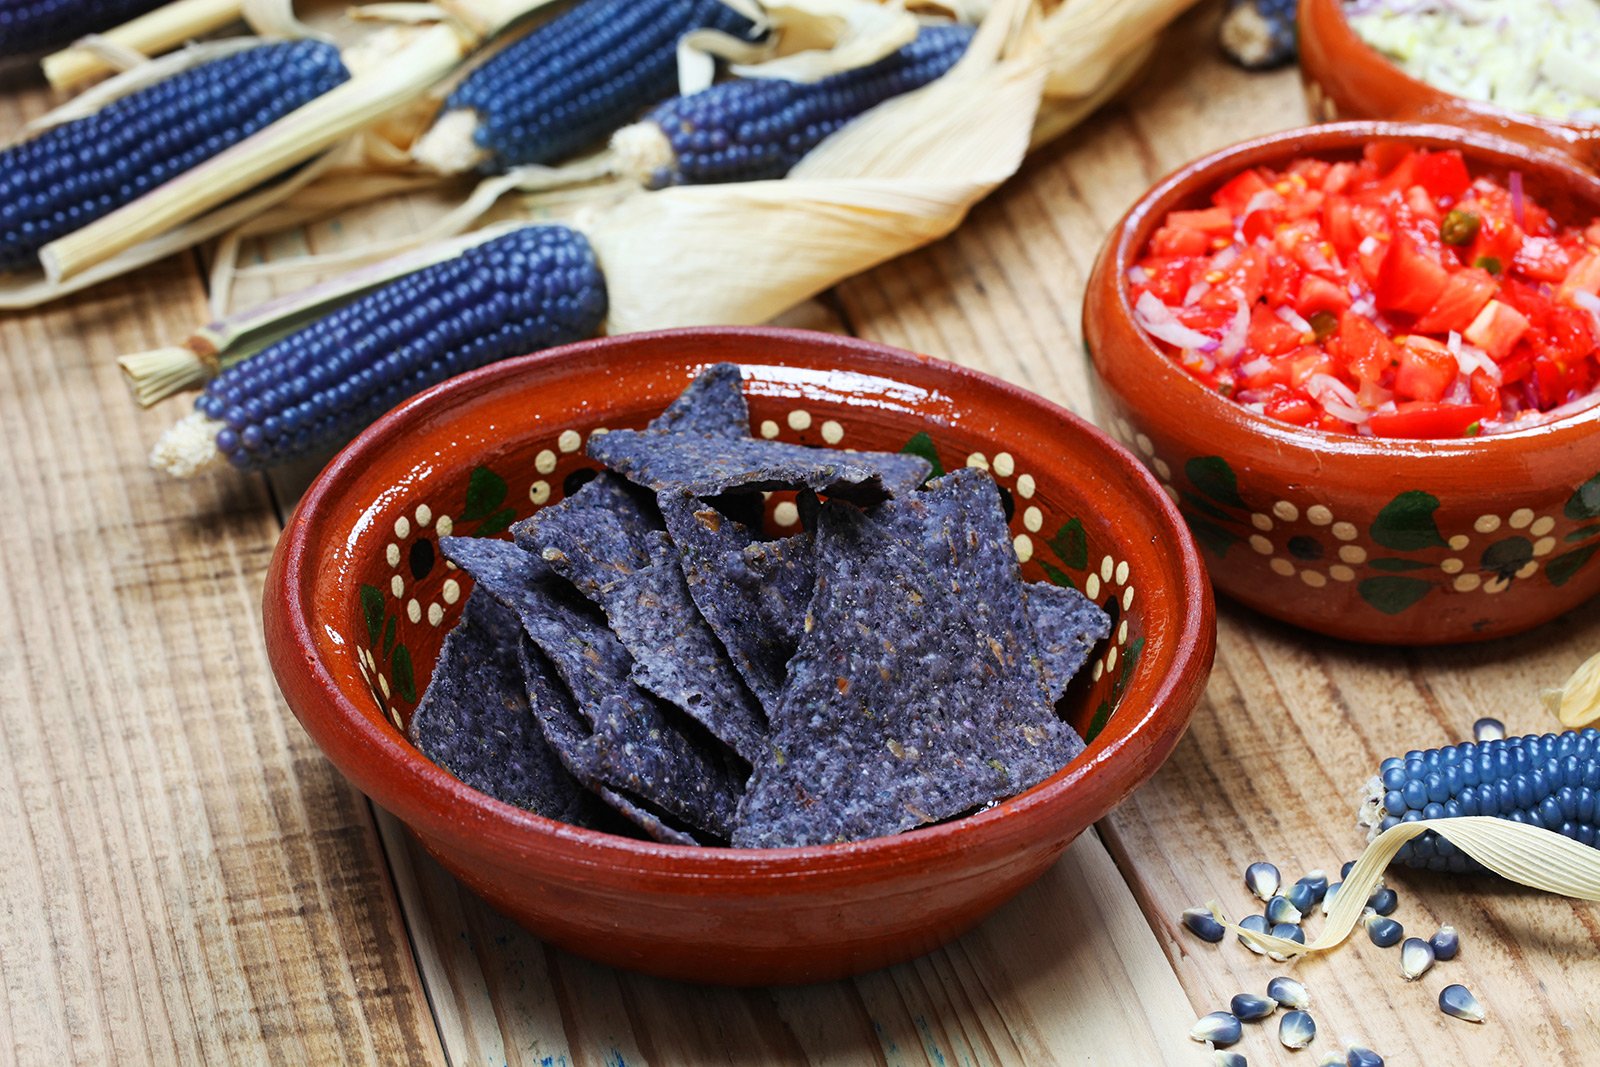 How to taste blue corn tortilla in Mexico City